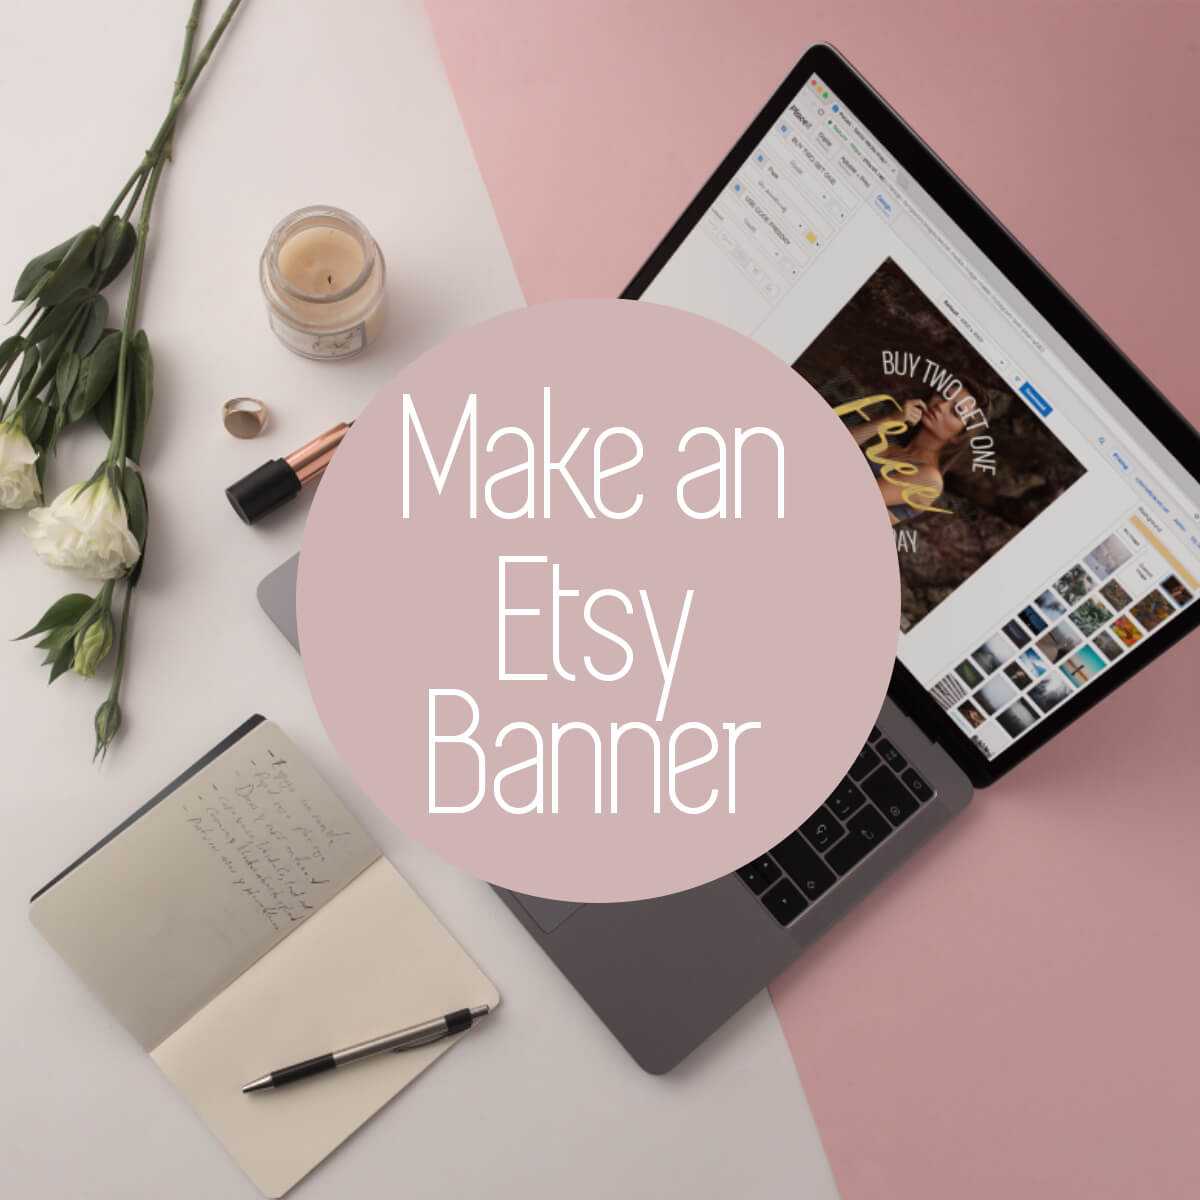 Personalize Your Etsy Shop - Cover Photos And Banners With Free Etsy Banner Template